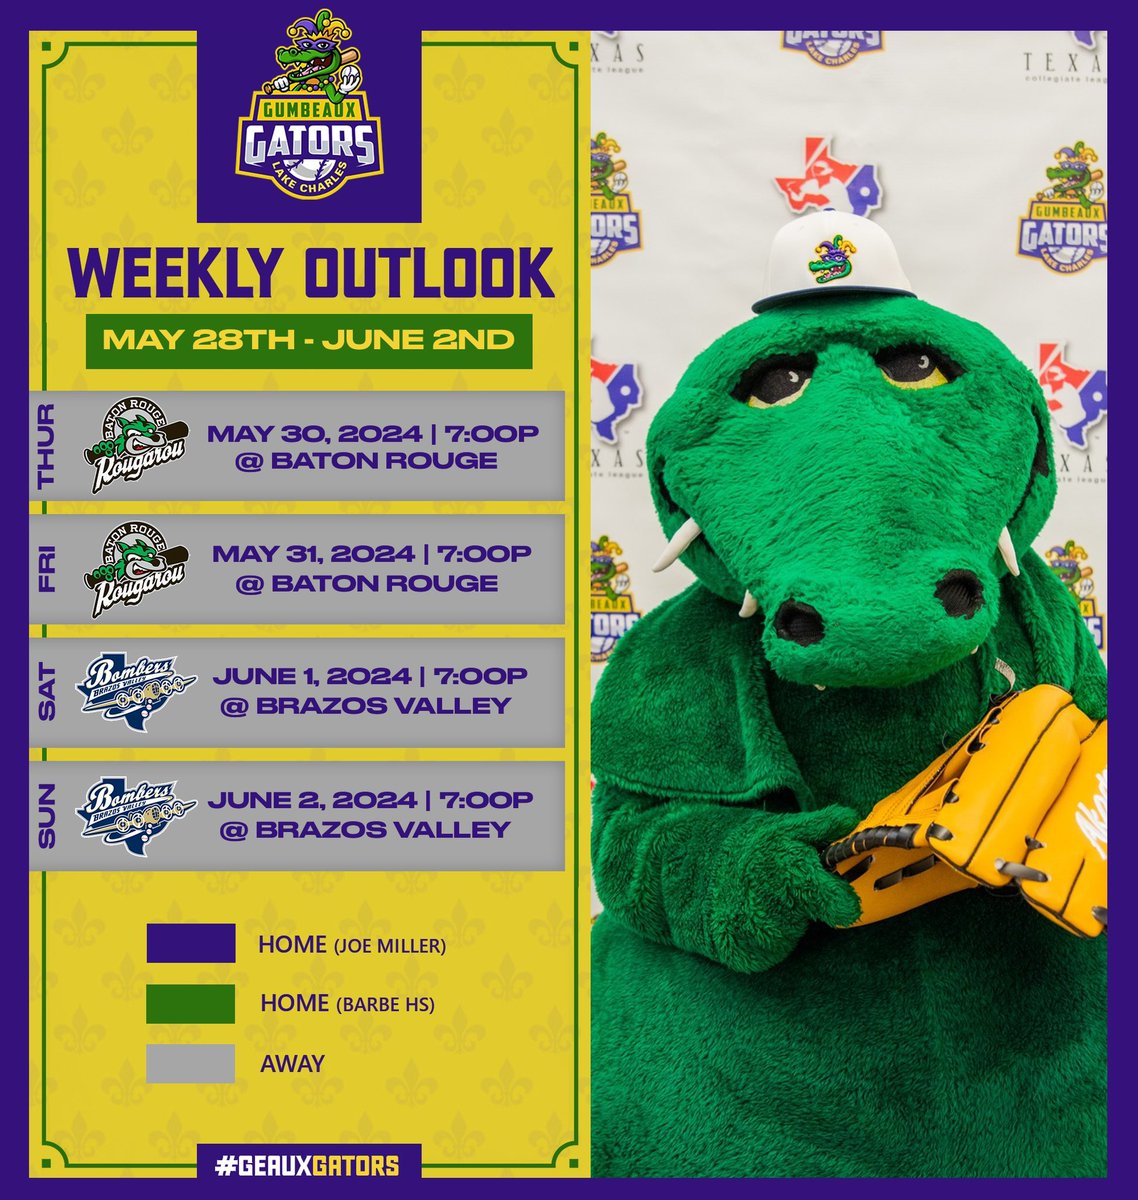 🚨 Our 2024 Inaugural Season begins this week with a 4-game road trip to Baton Rouge and Brazos Valley!

Every Monday we will be posting a “Weekly Outlook”, to keep you up to date on the games in the week ahead! 🐊⚾️

#GumbeauxGators #GeauxGators